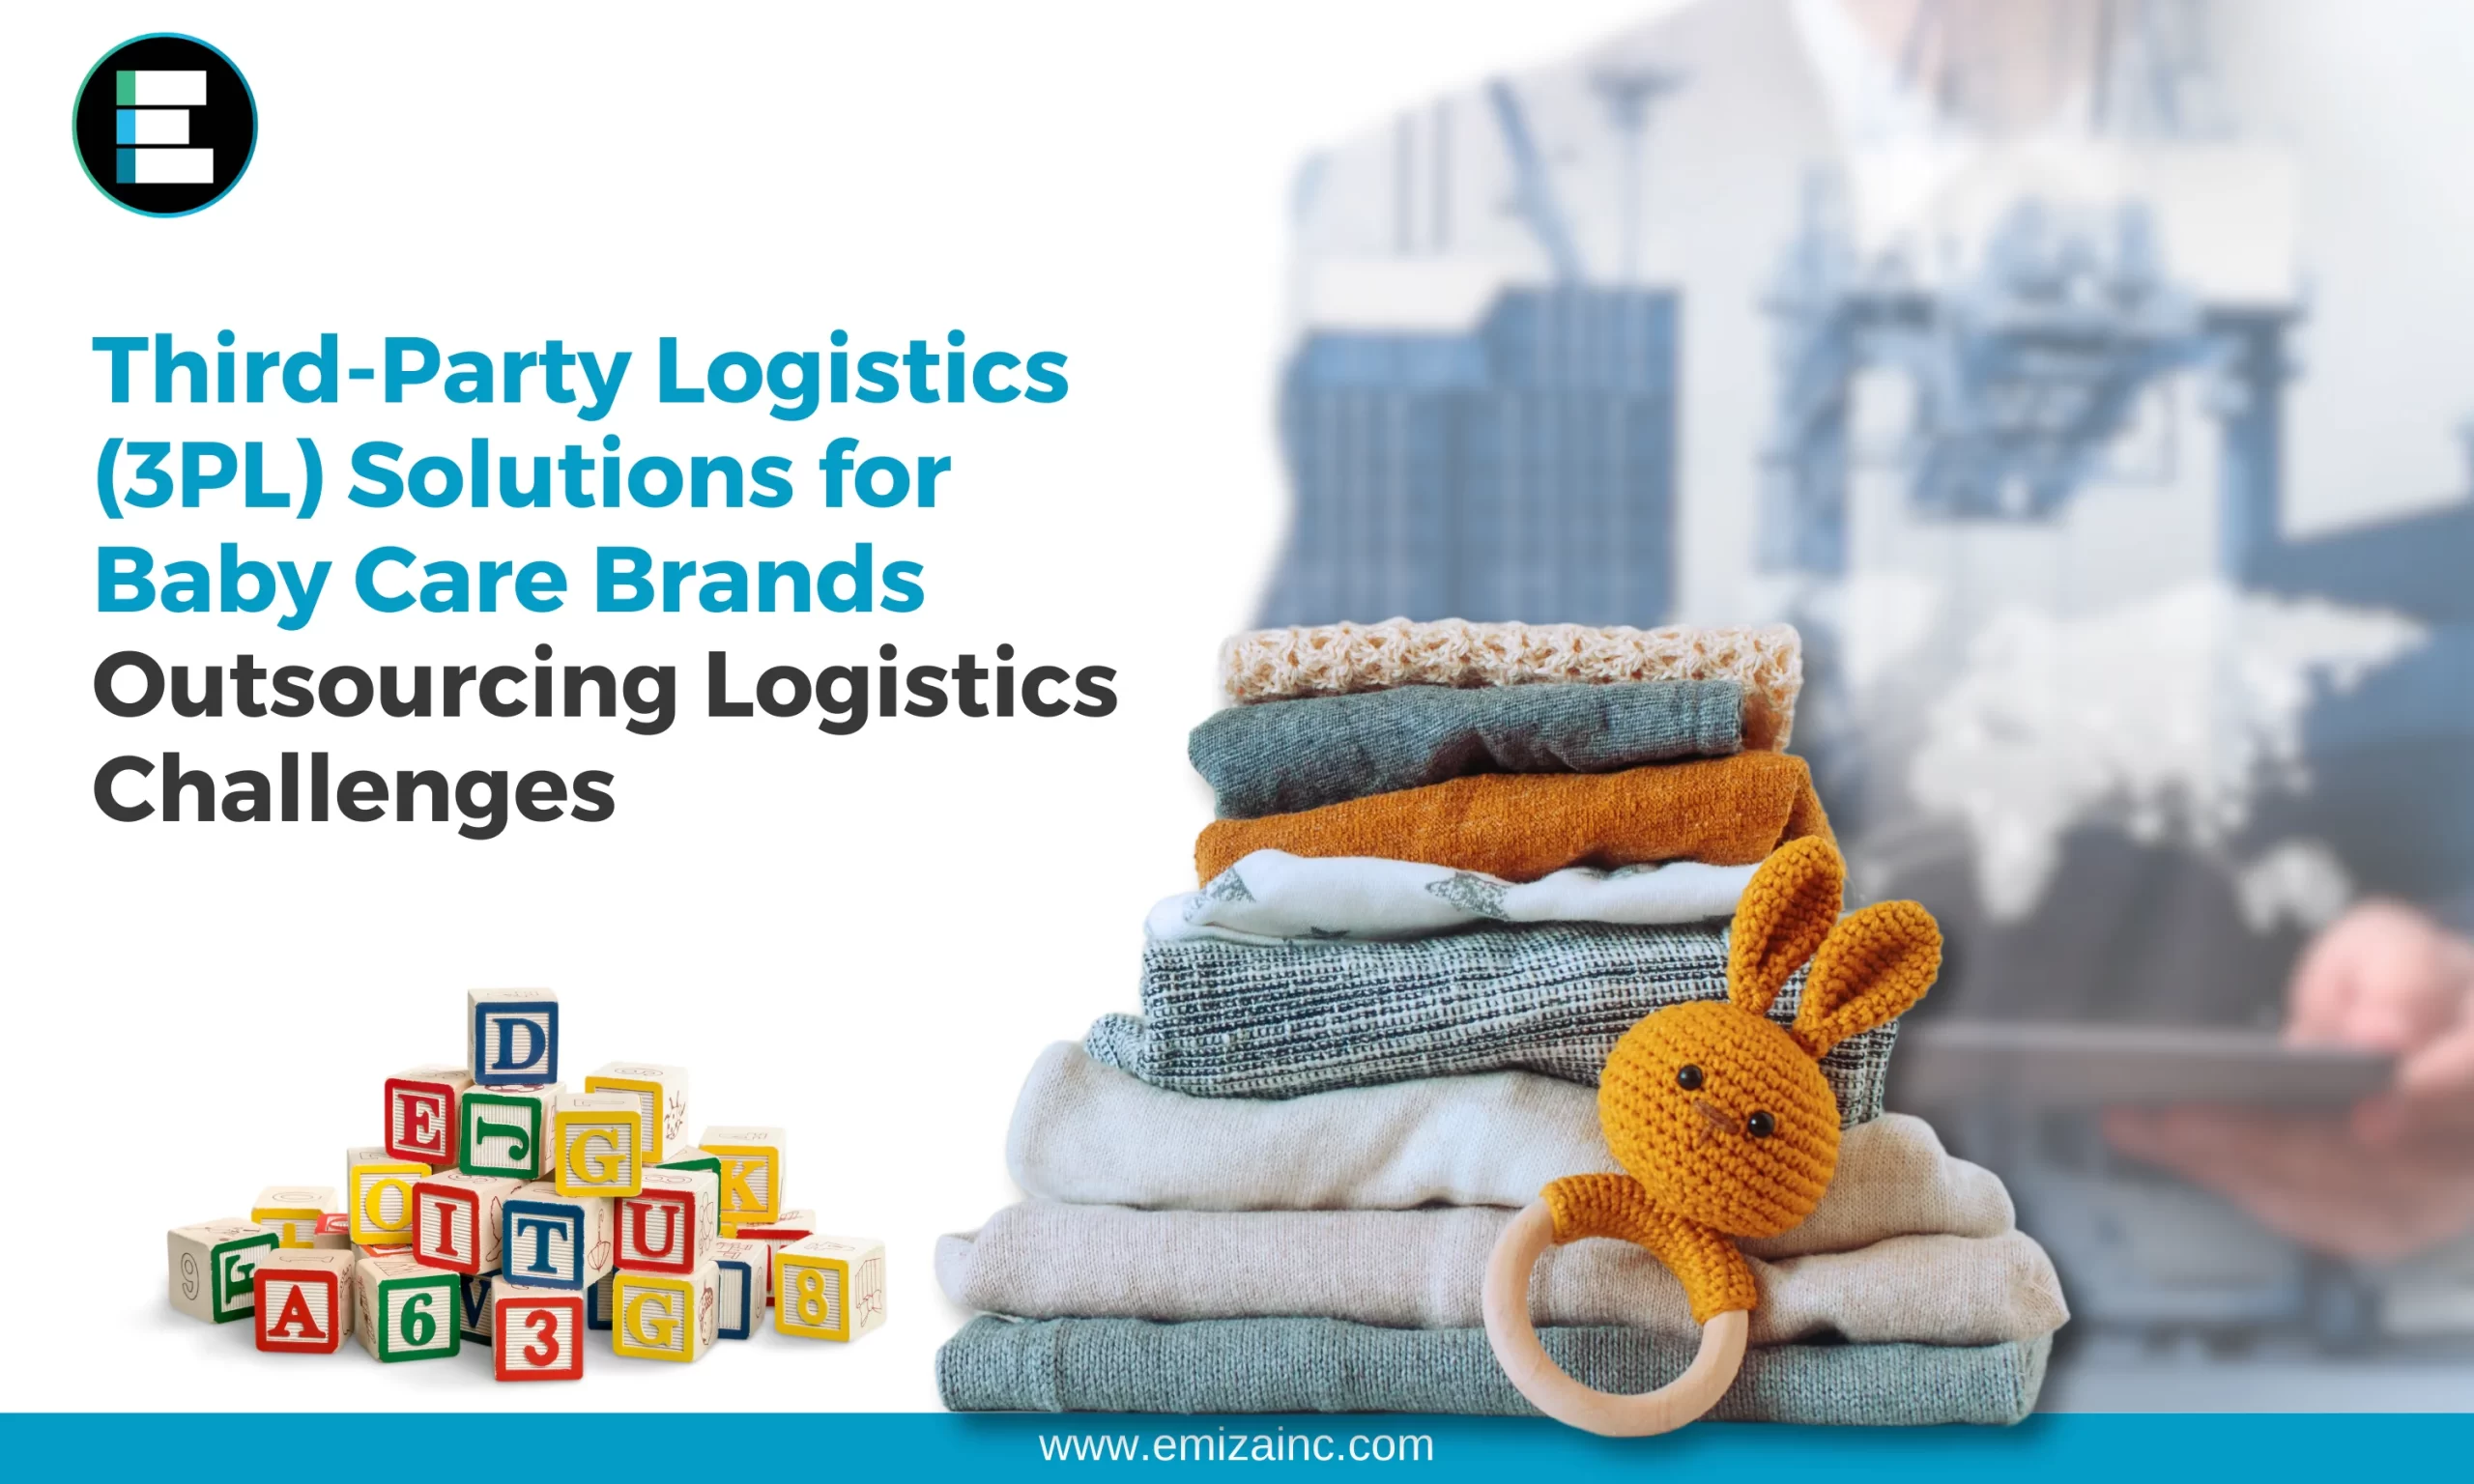 Third-Party Logistics (3PL) Solutions for Baby Care Brands: Supply Chain Challenges